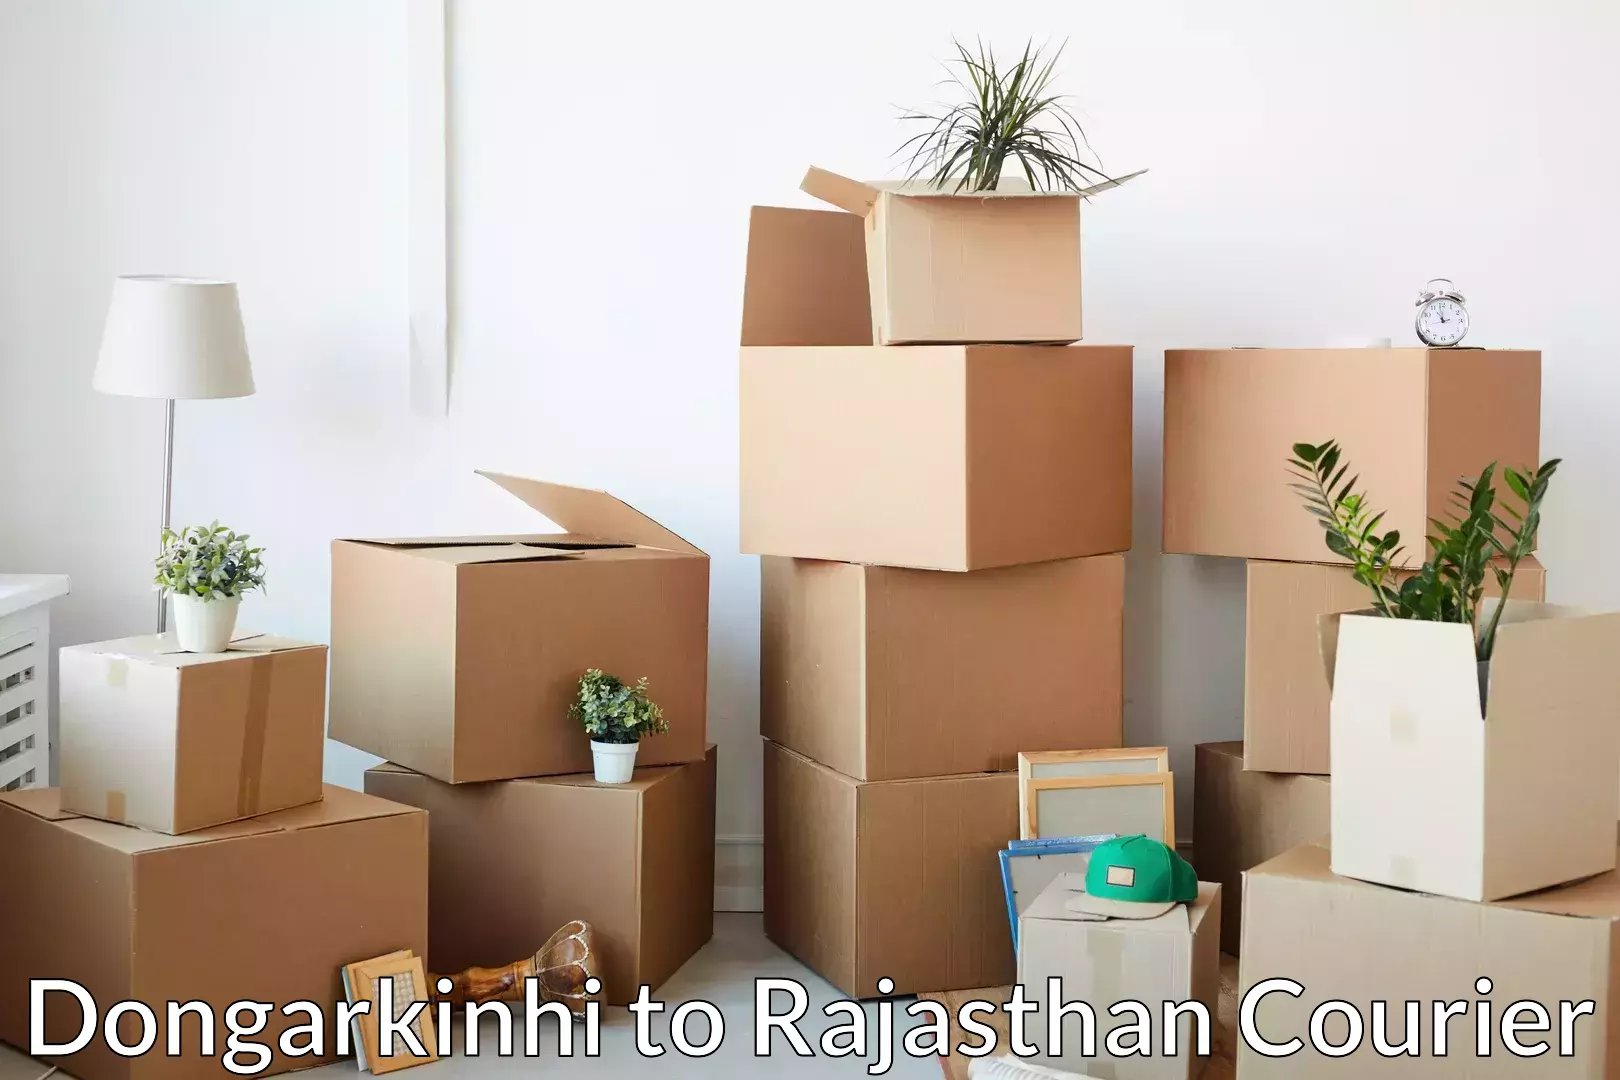 Professional movers and packers Dongarkinhi to Rajasthan